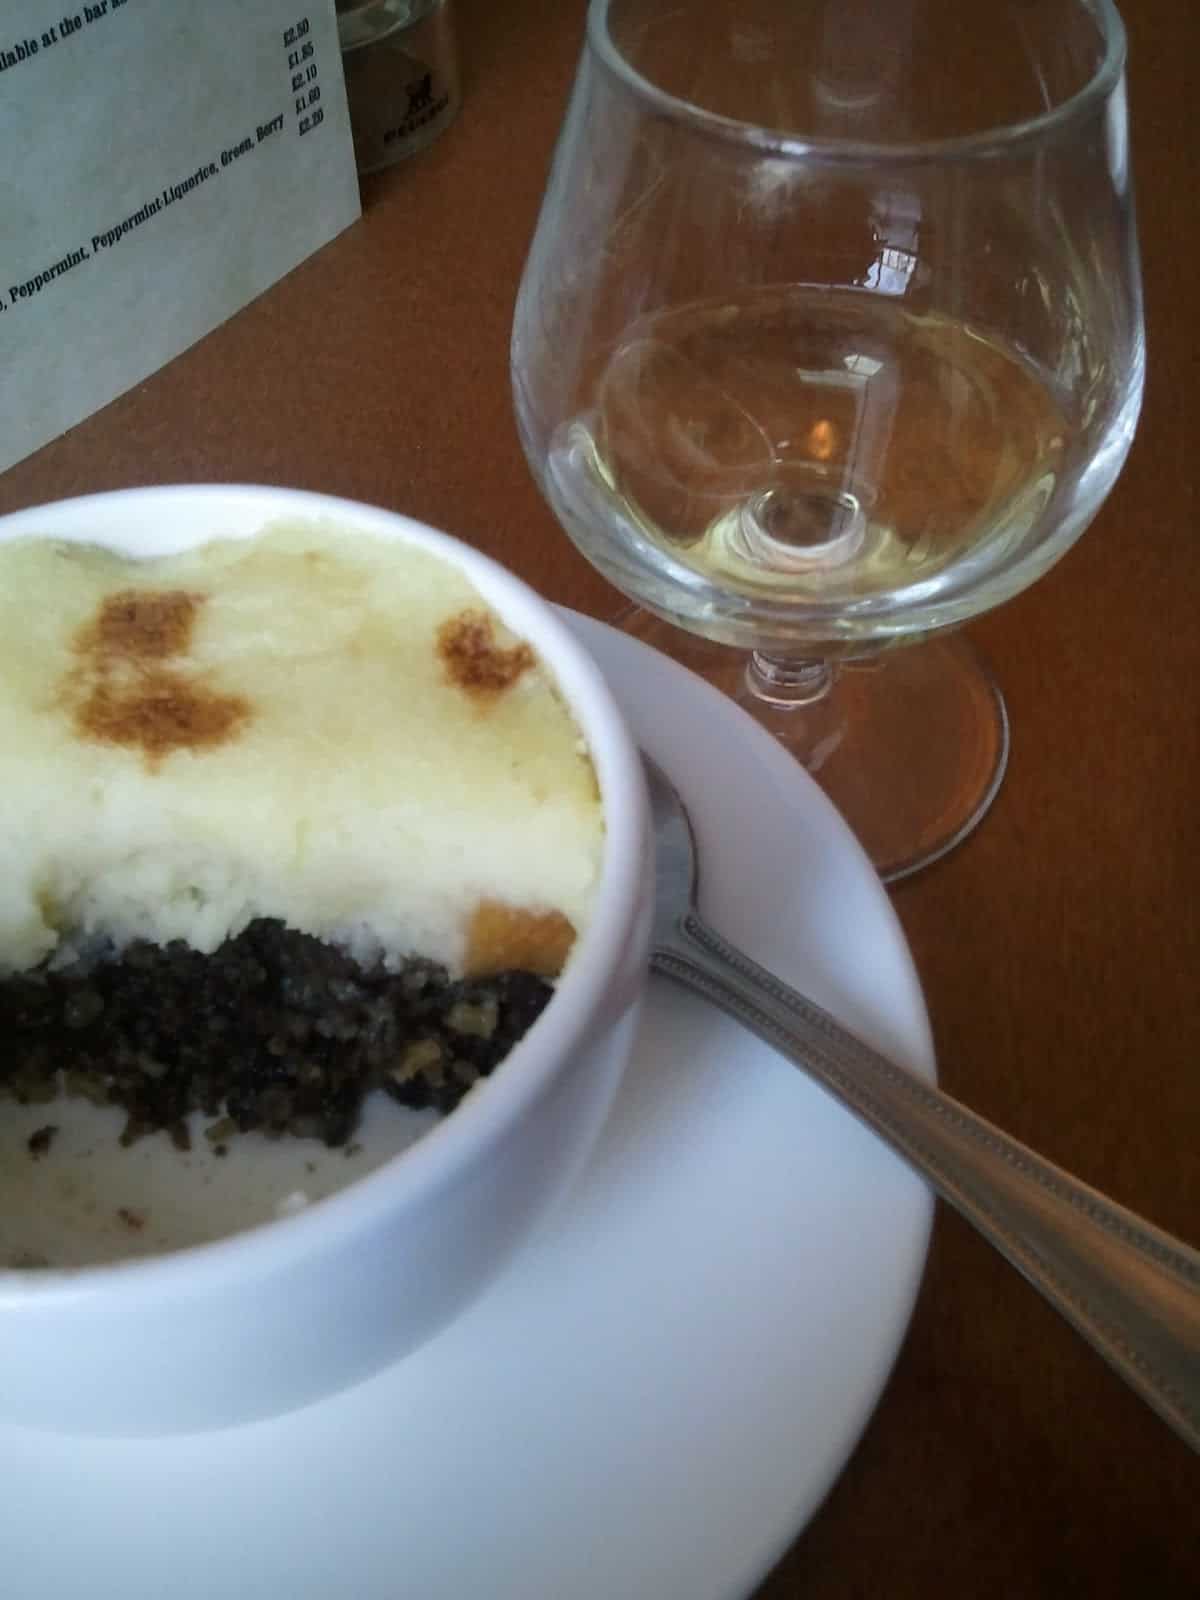 Haggis, neeps, and tatties and a dram of whiskey